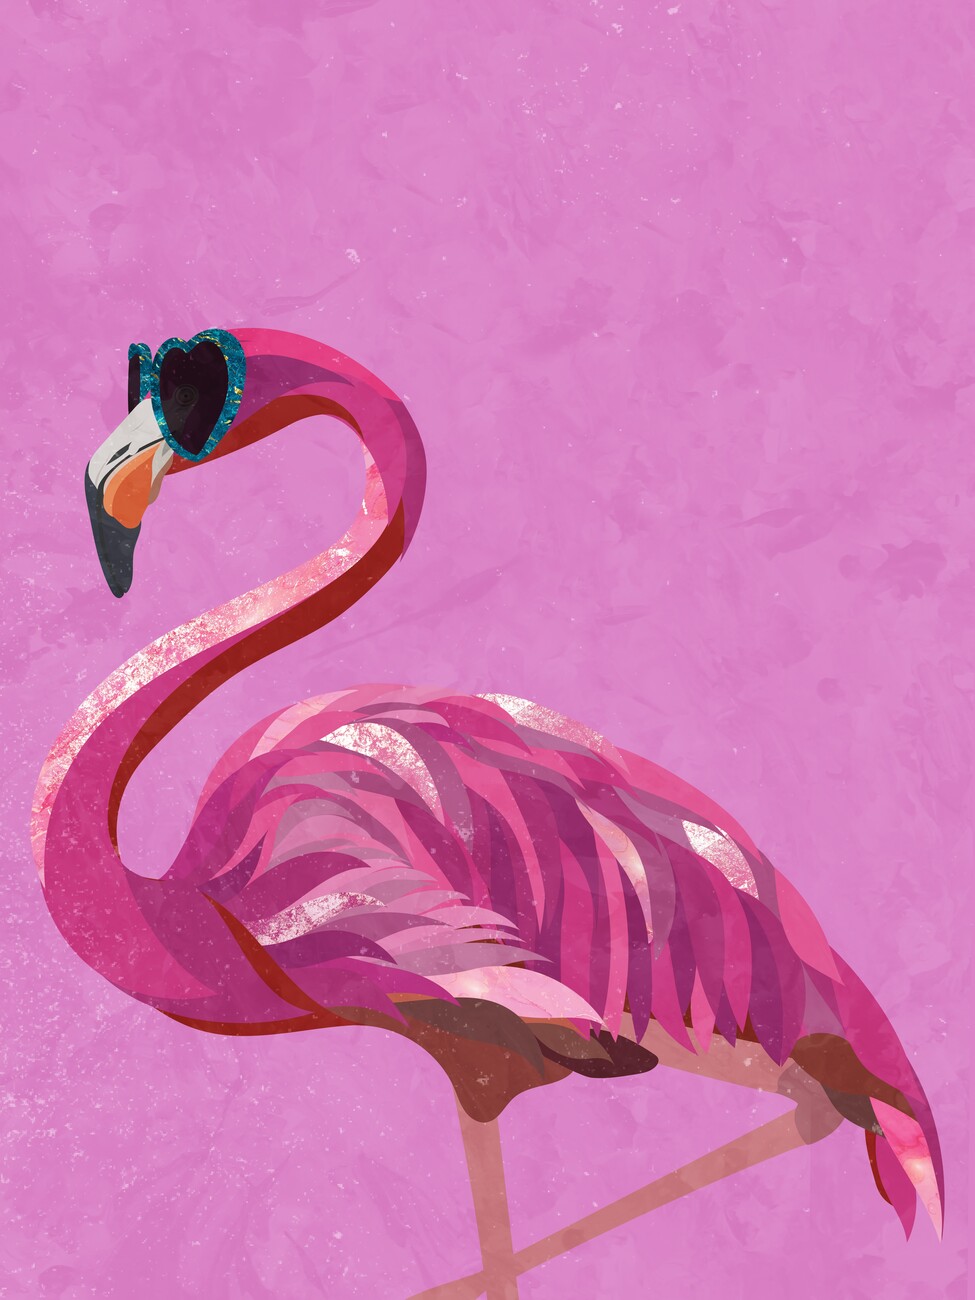 Pink flamingo For sale as Framed Prints, Photos, Wall Art and